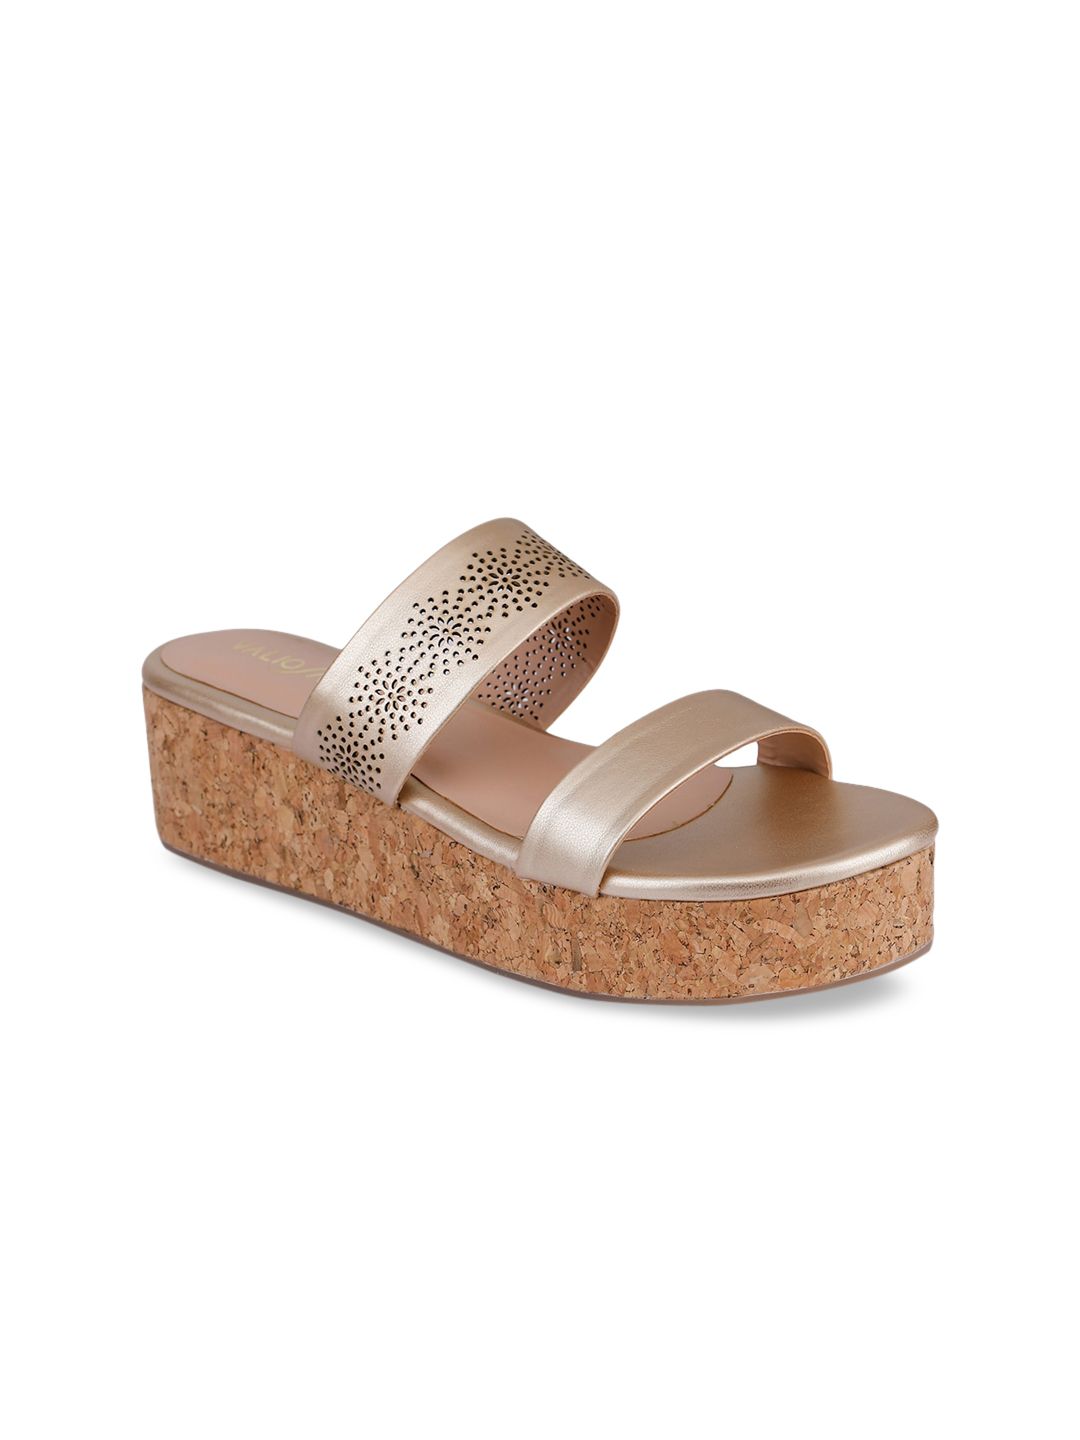 VALIOSAA Gold-Toned Wedge Sandals with Laser Cuts Price in India